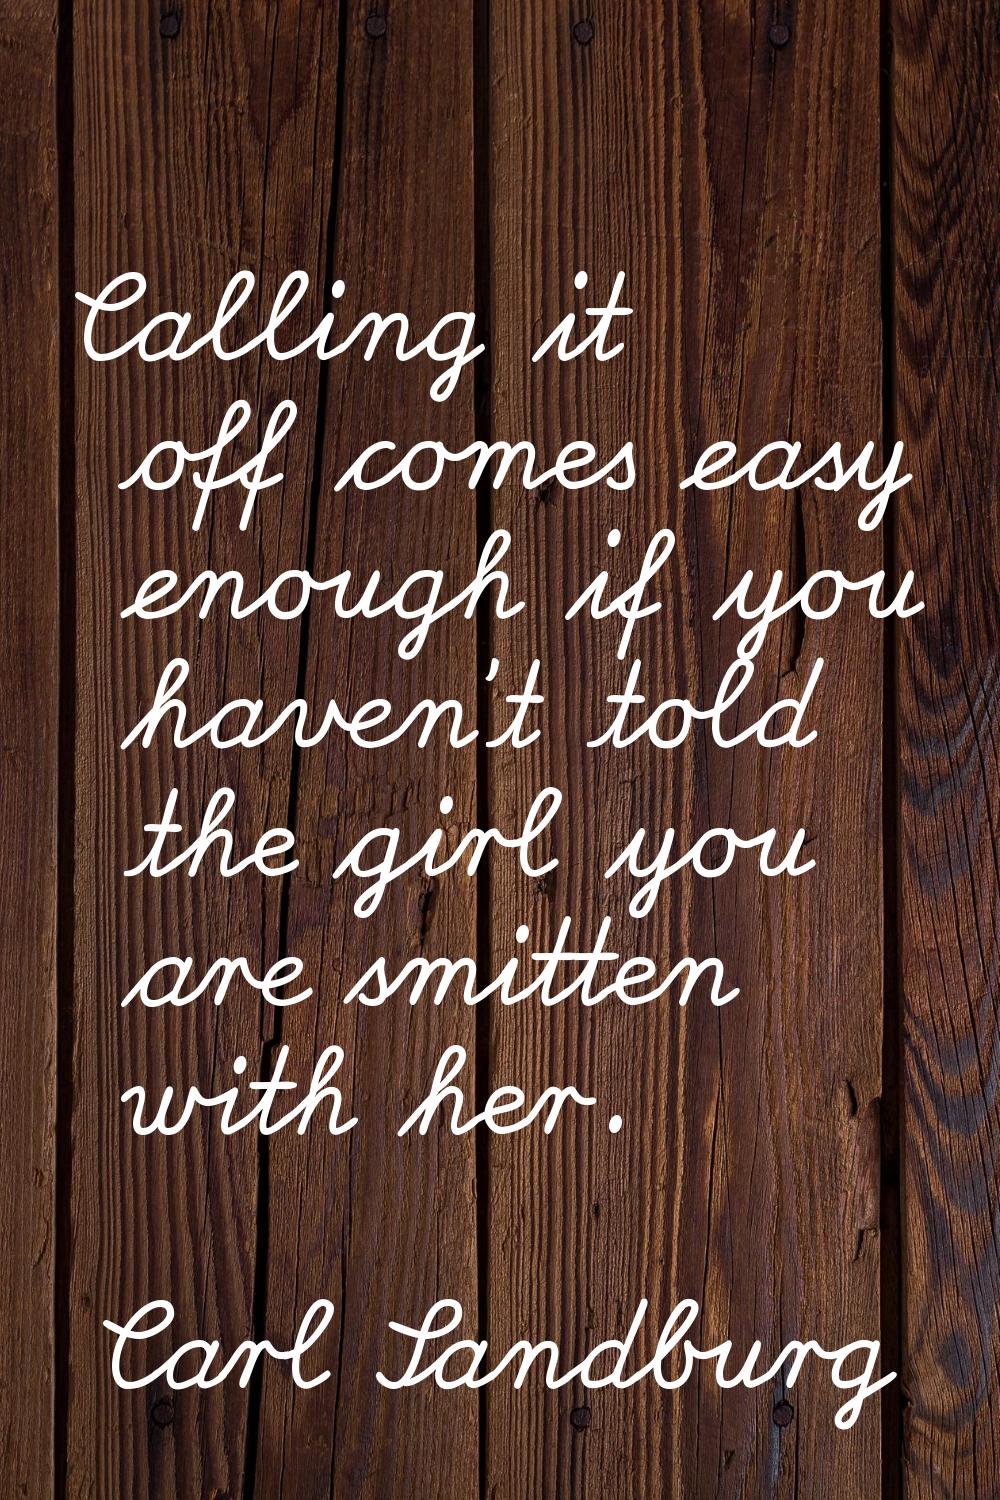 Calling it off comes easy enough if you haven't told the girl you are smitten with her.